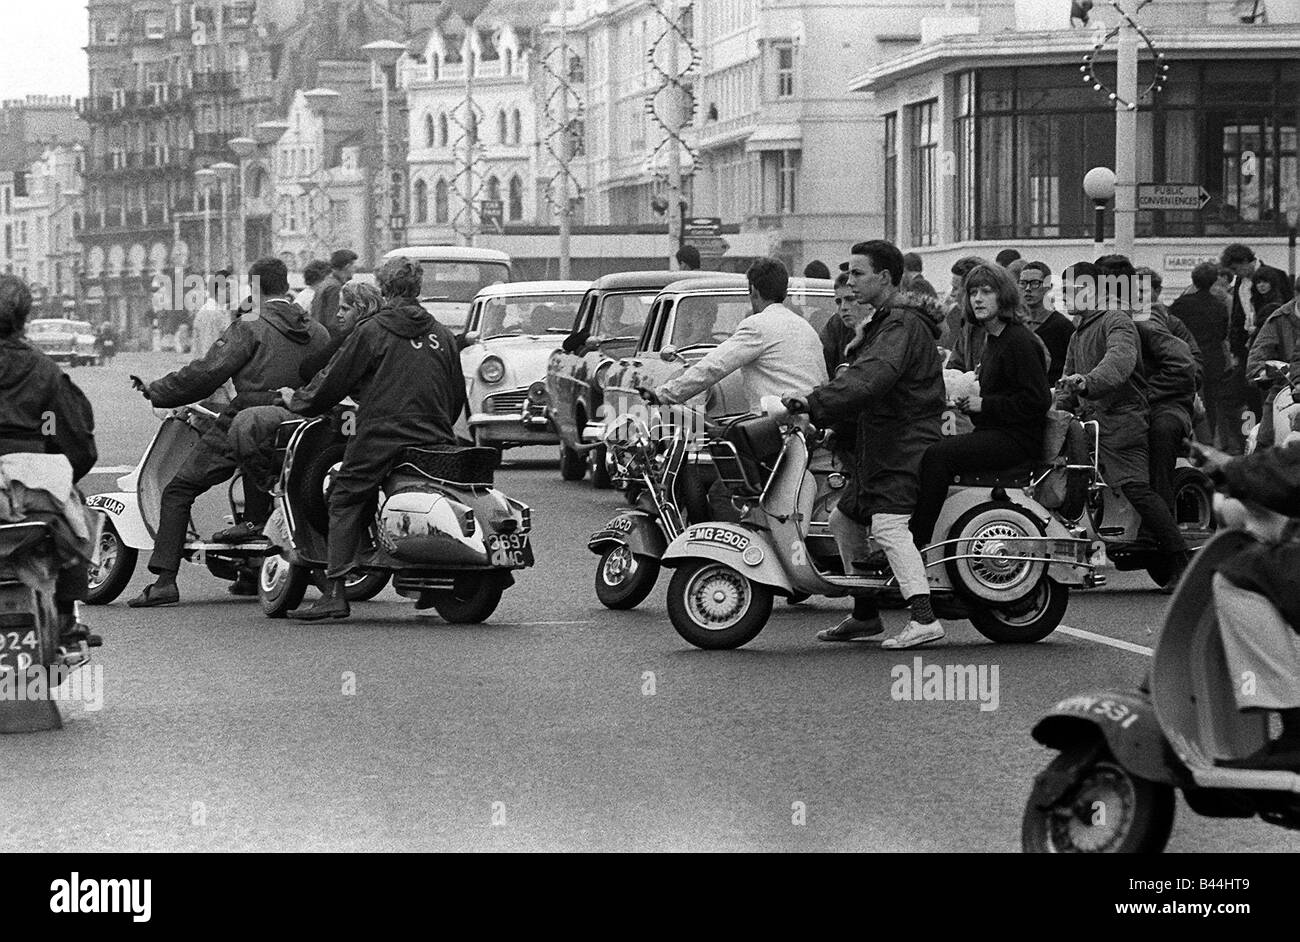 Mods gather on their scooters in Hasting 1964 Stock Photo - Alamy